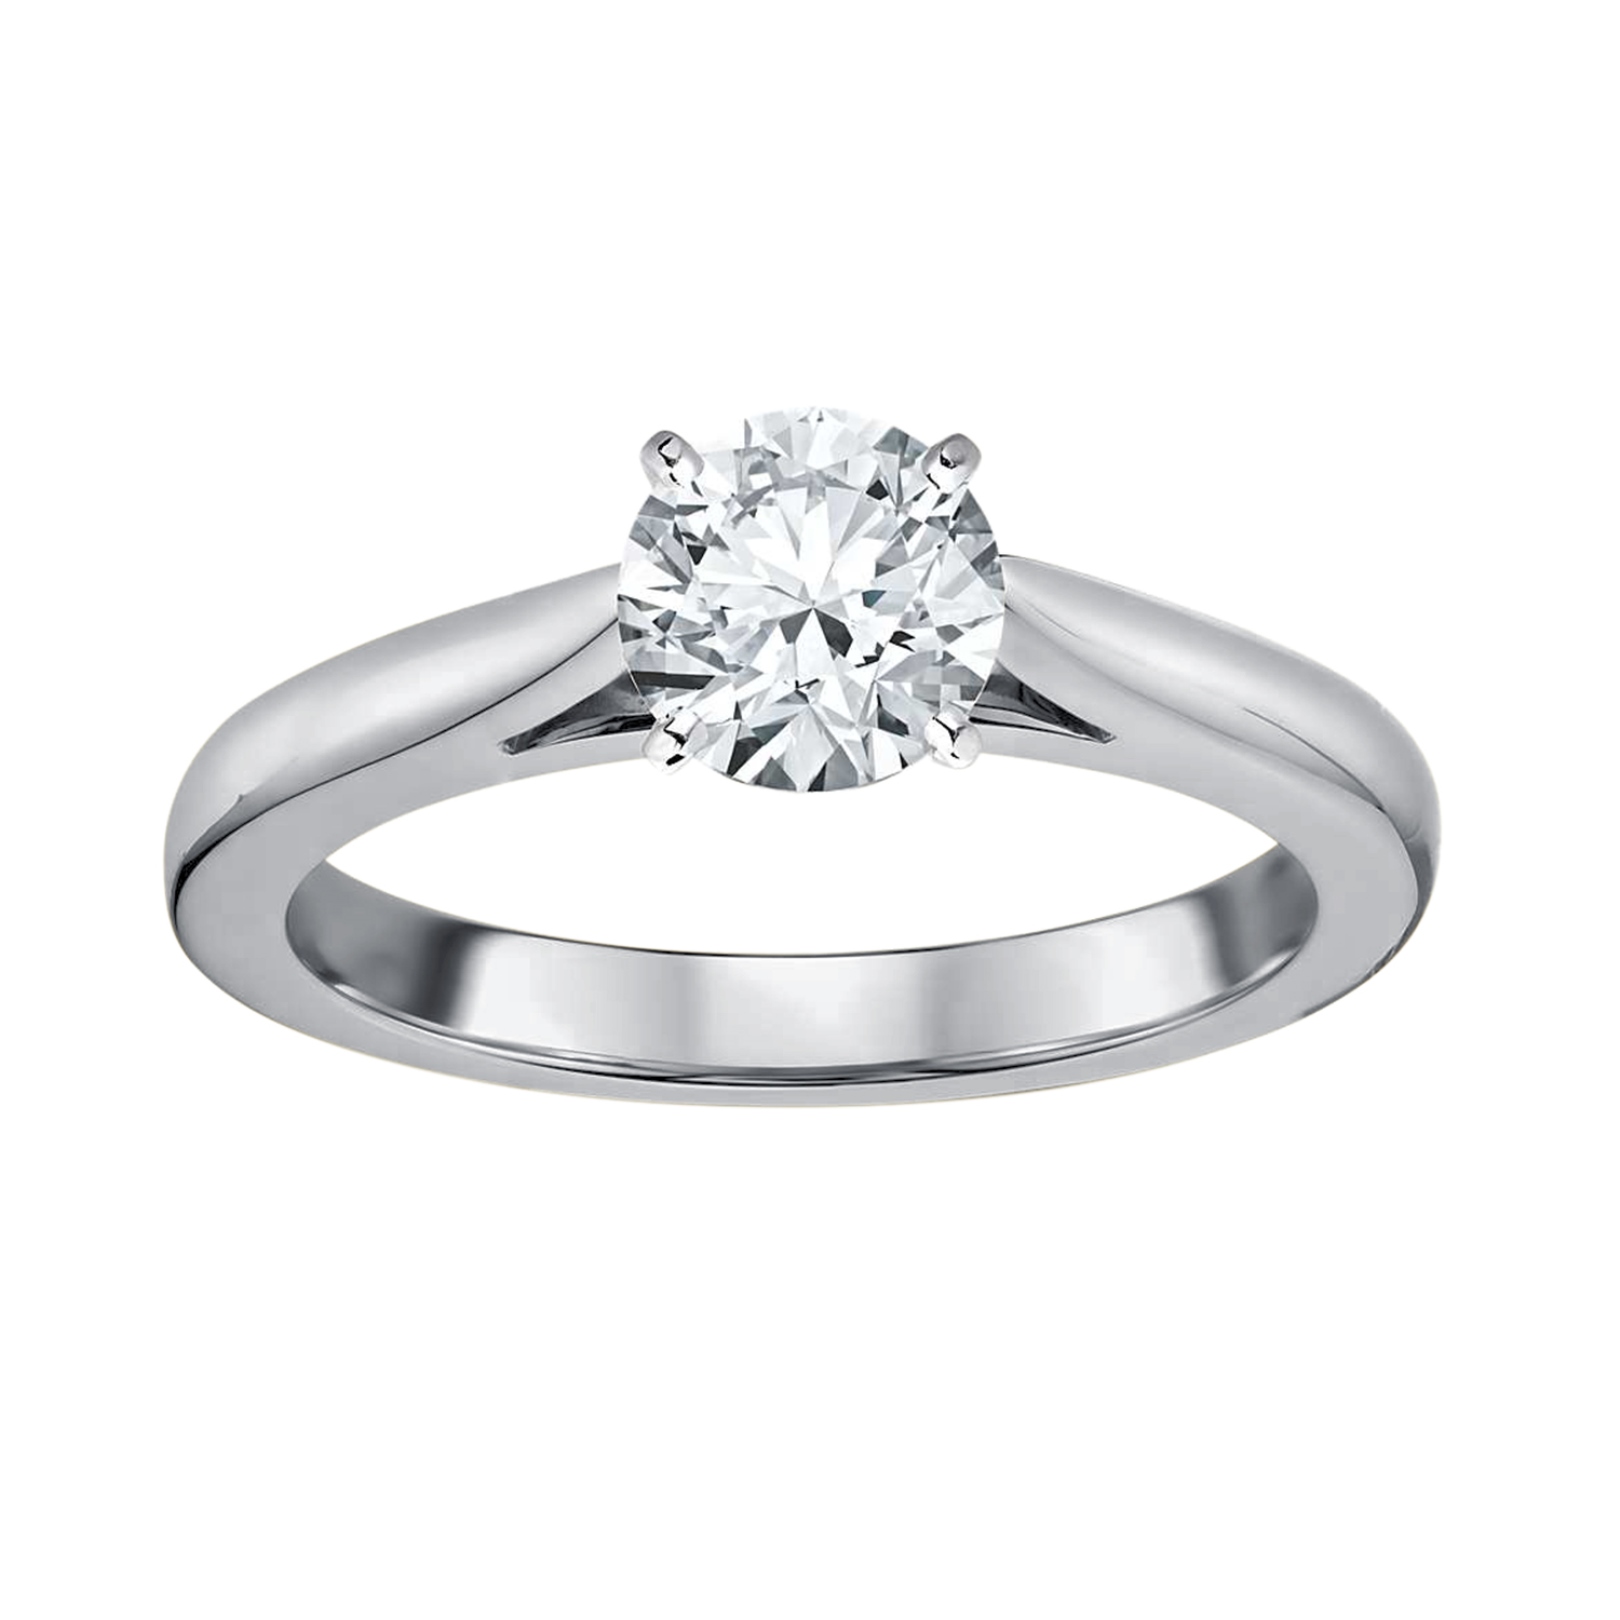 Tradition Diamond 14K White Gold 1 CTTW Certified Diamond Ring - Size 7 Only